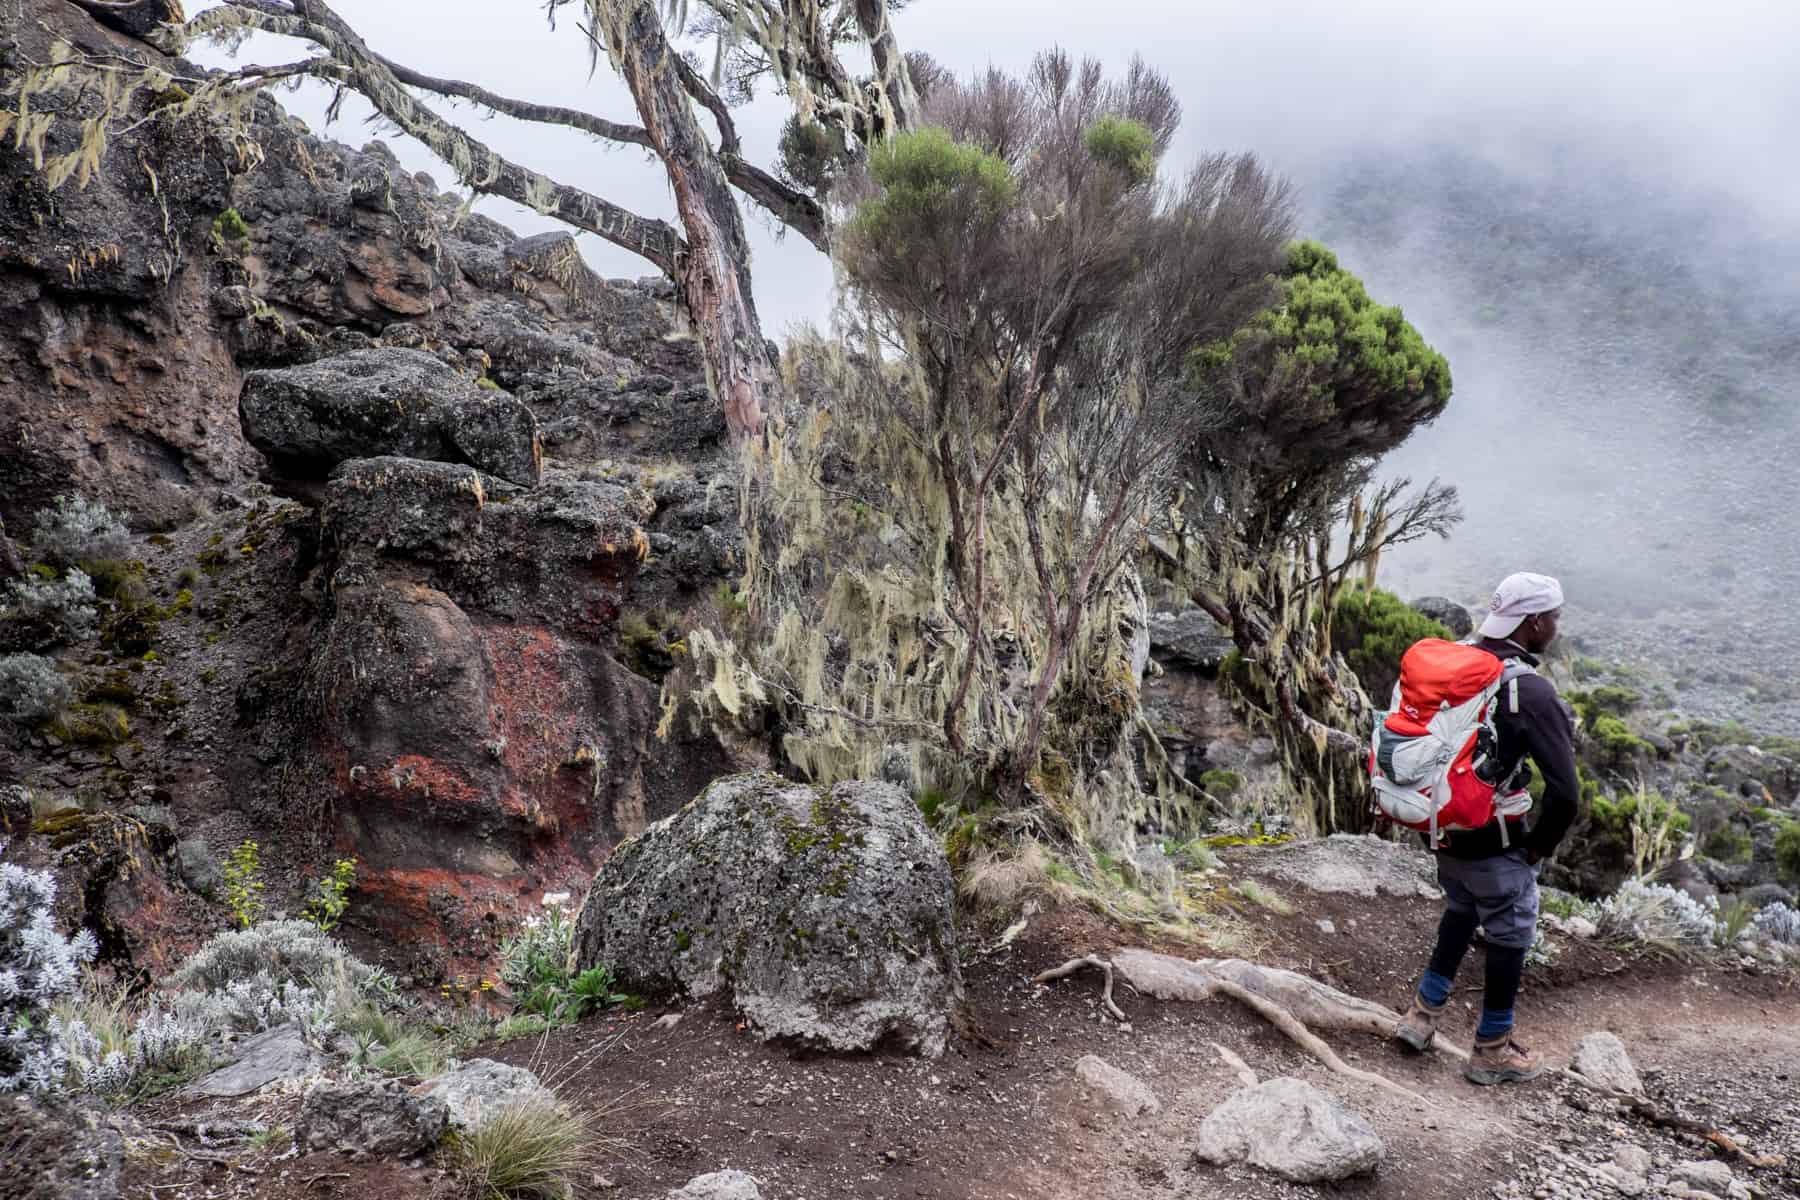 A man wearing black with a red backpack leads the way down a dry mud path on Kilimanjaro mountain, lined with alpine desert trees and orange rocks